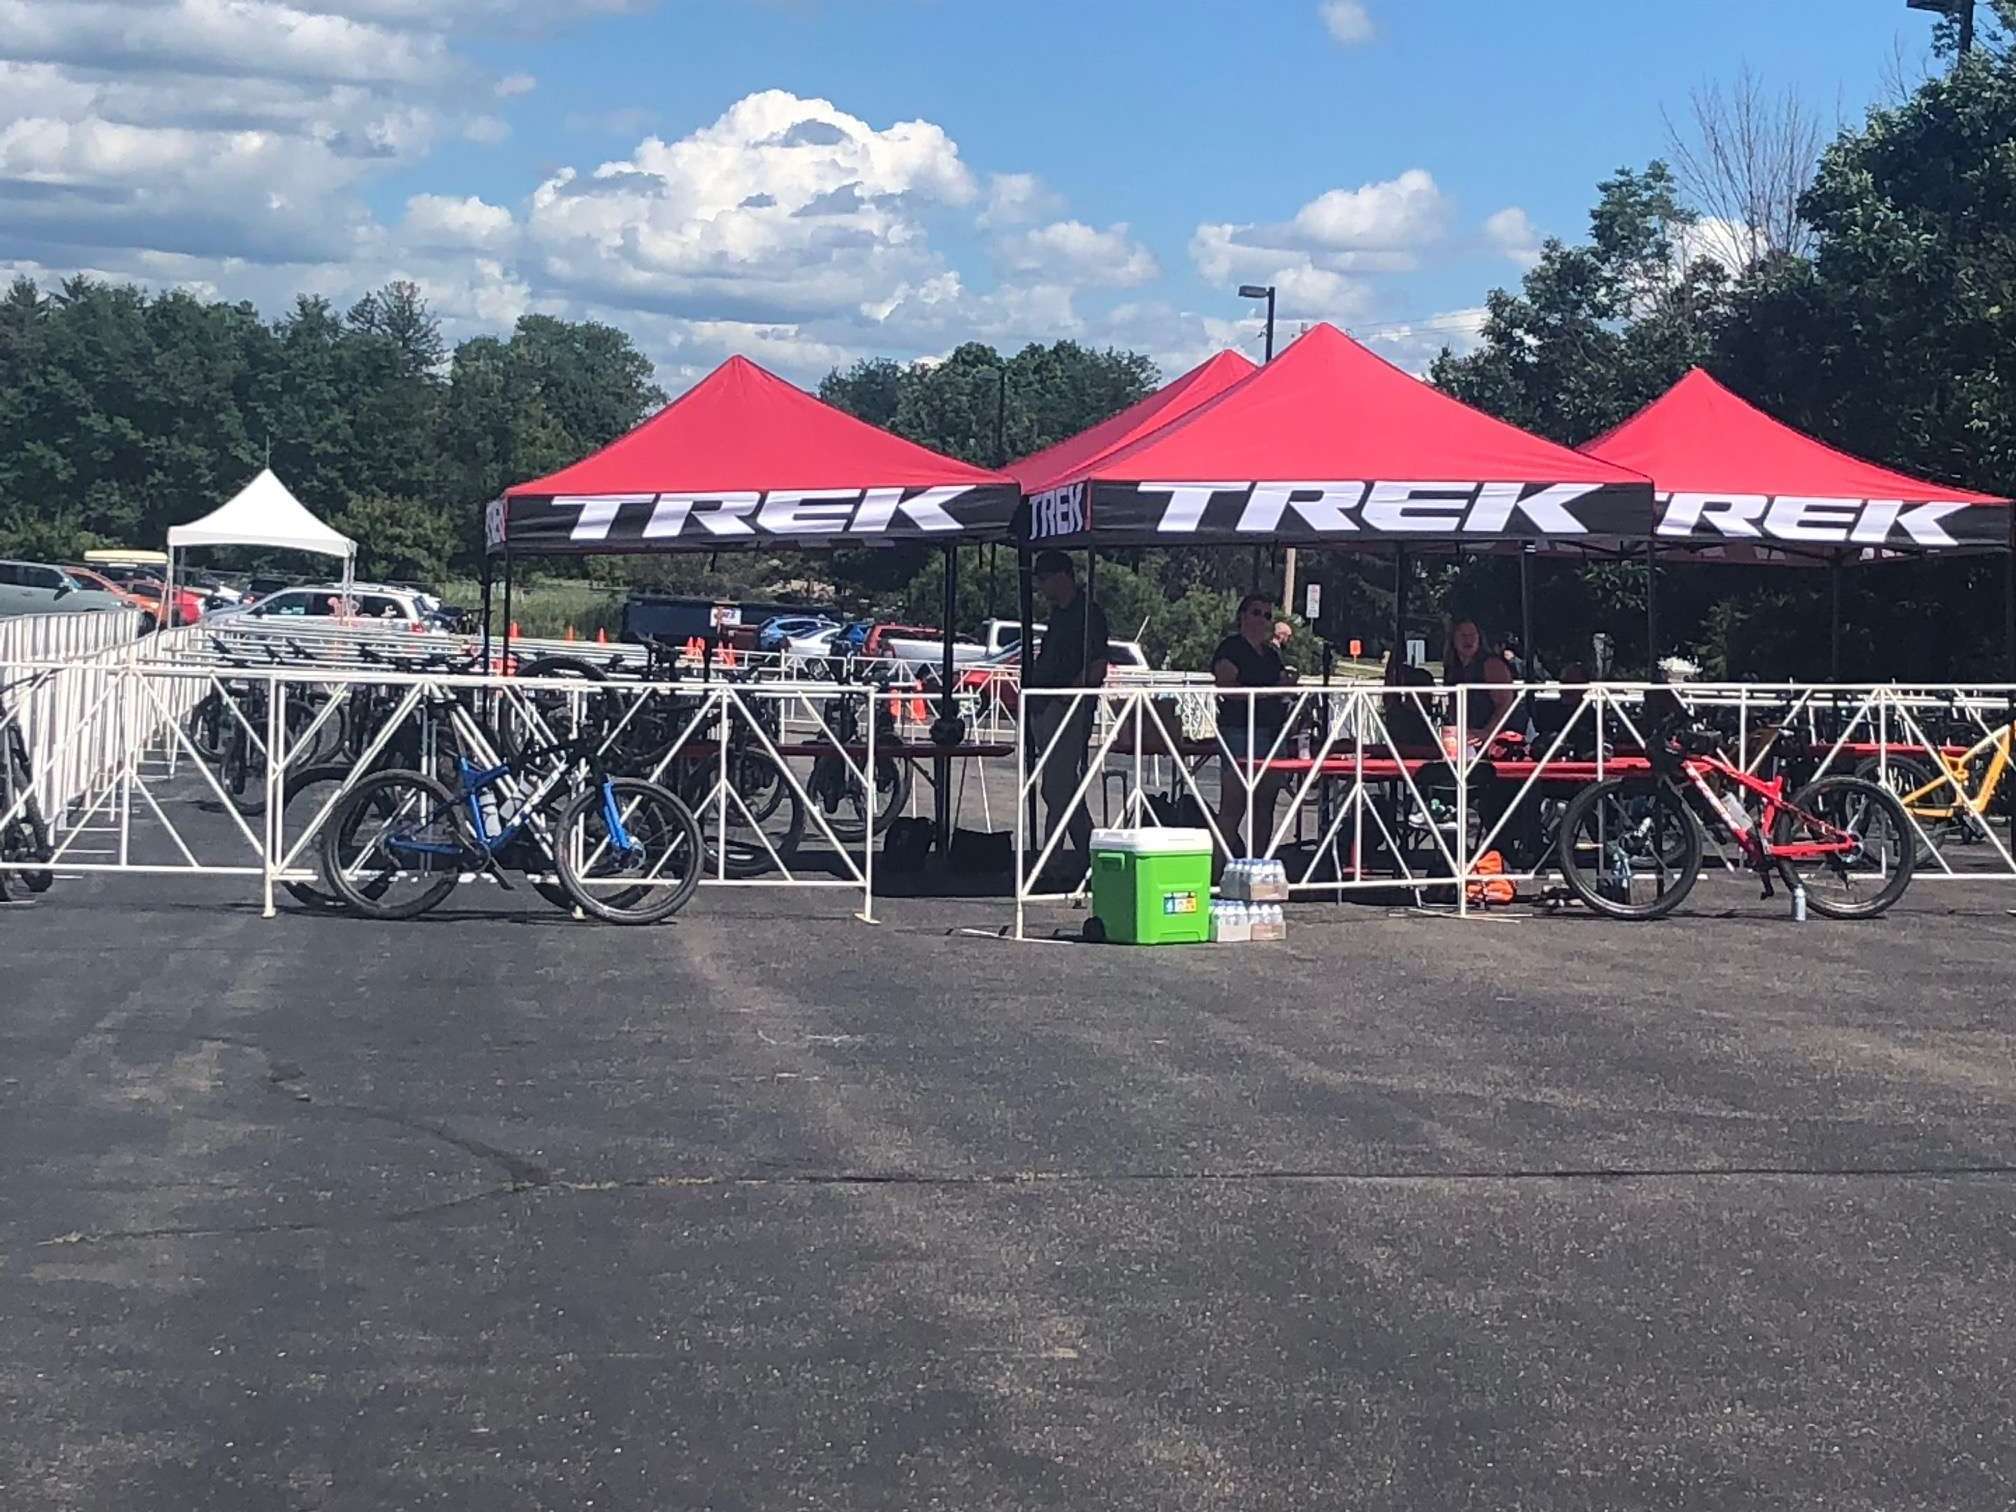 3 Trek tents with bicycles all around